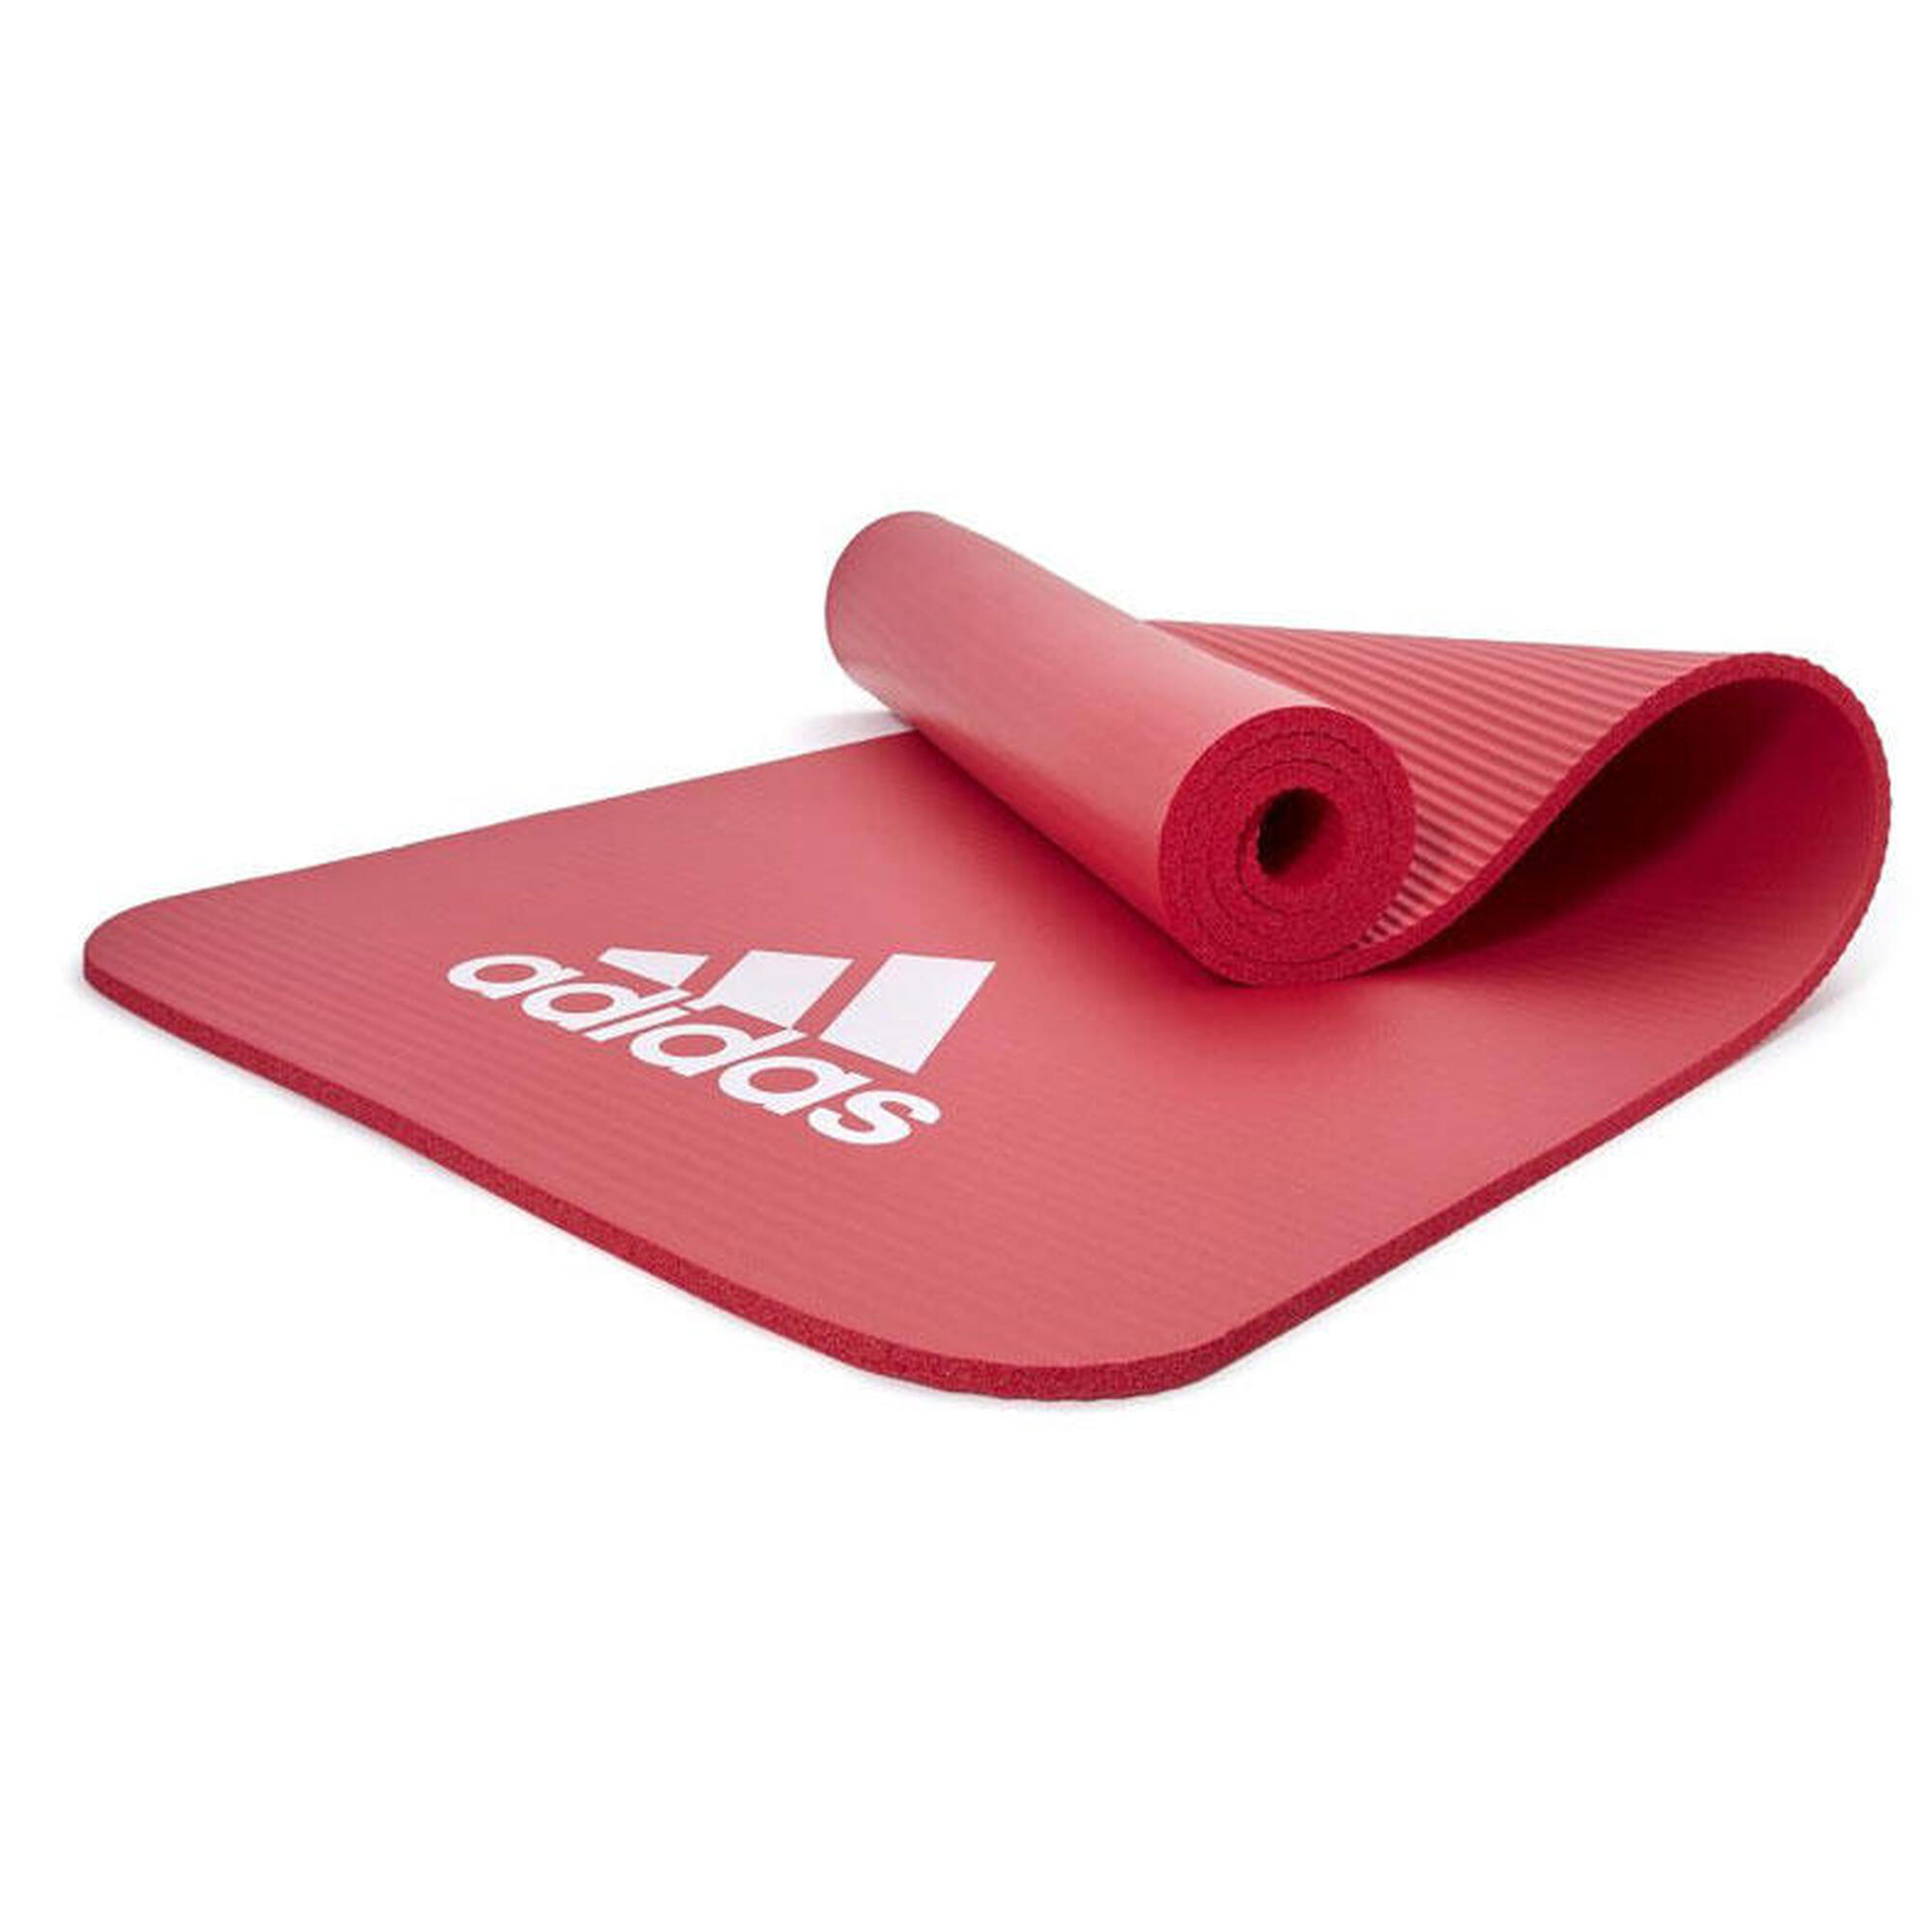 Tappetino di fitness Adidas - 10mm - Rosso